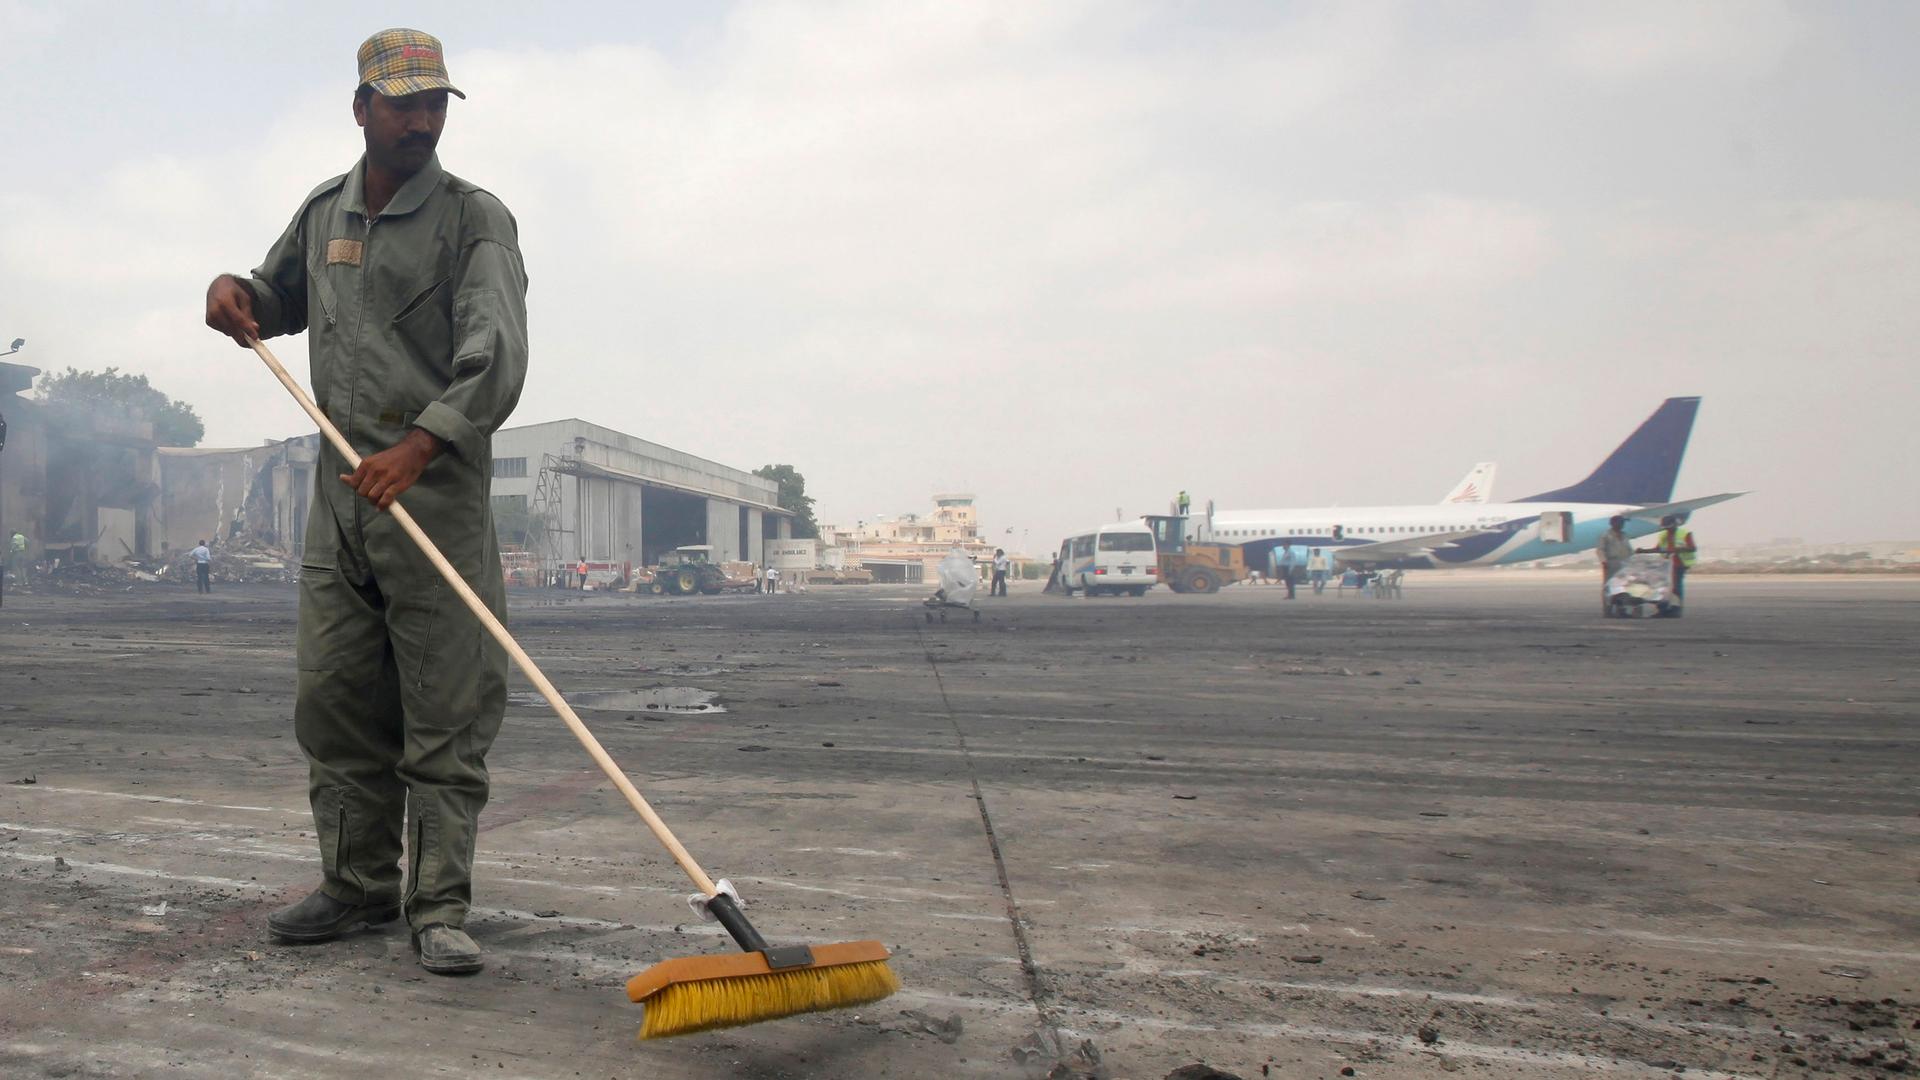 A man clears debris from the tarmac of Jinnah International Airport, after Sunday's attack by Taliban militants on Sunday, in Karachi June 10, 2014. Taliban militants disguised as security forces stormed into Pakistan's busiest airport on Sunday night, tr